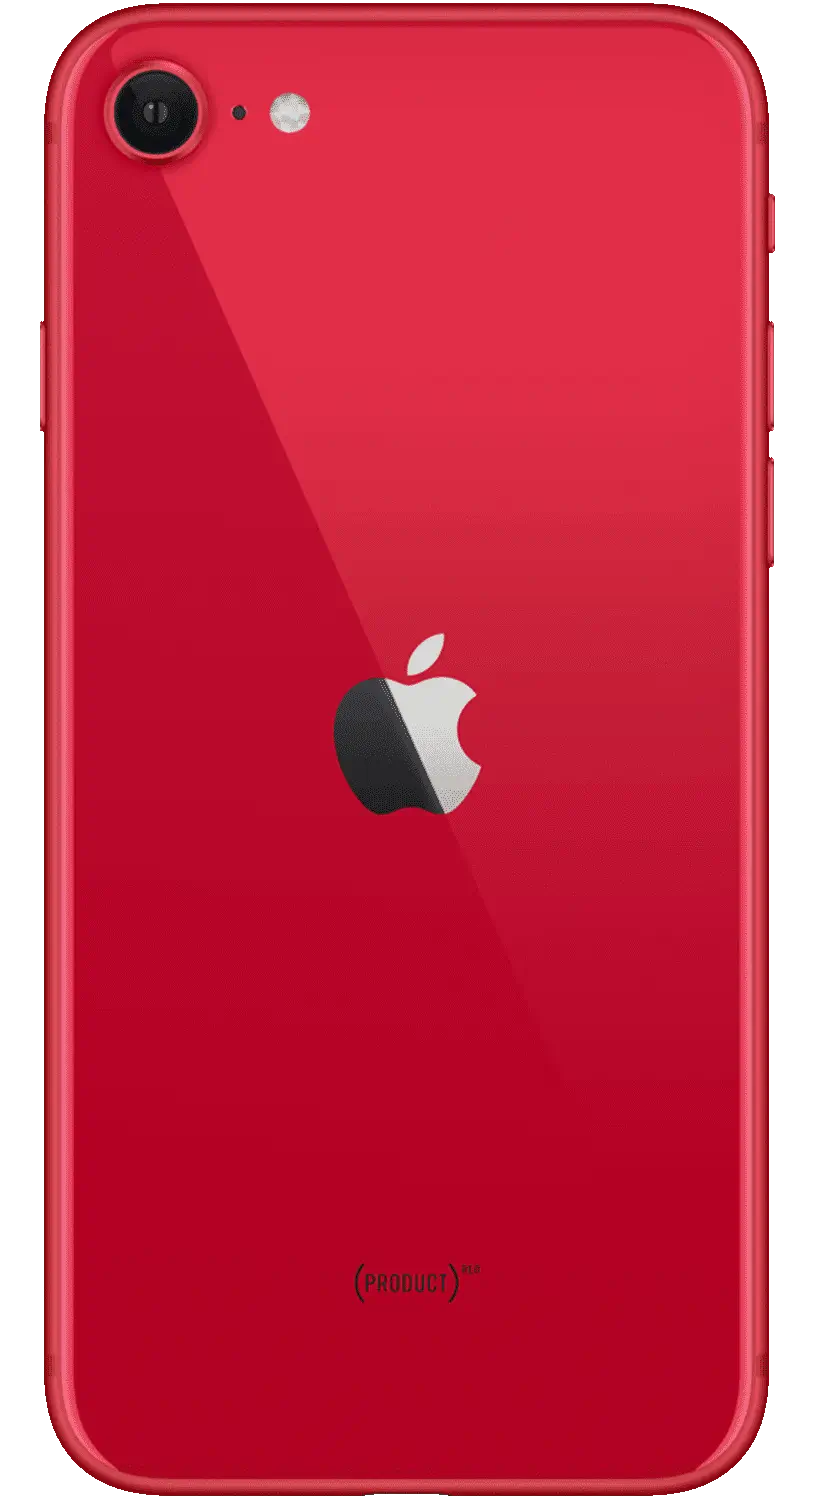 iphone se front